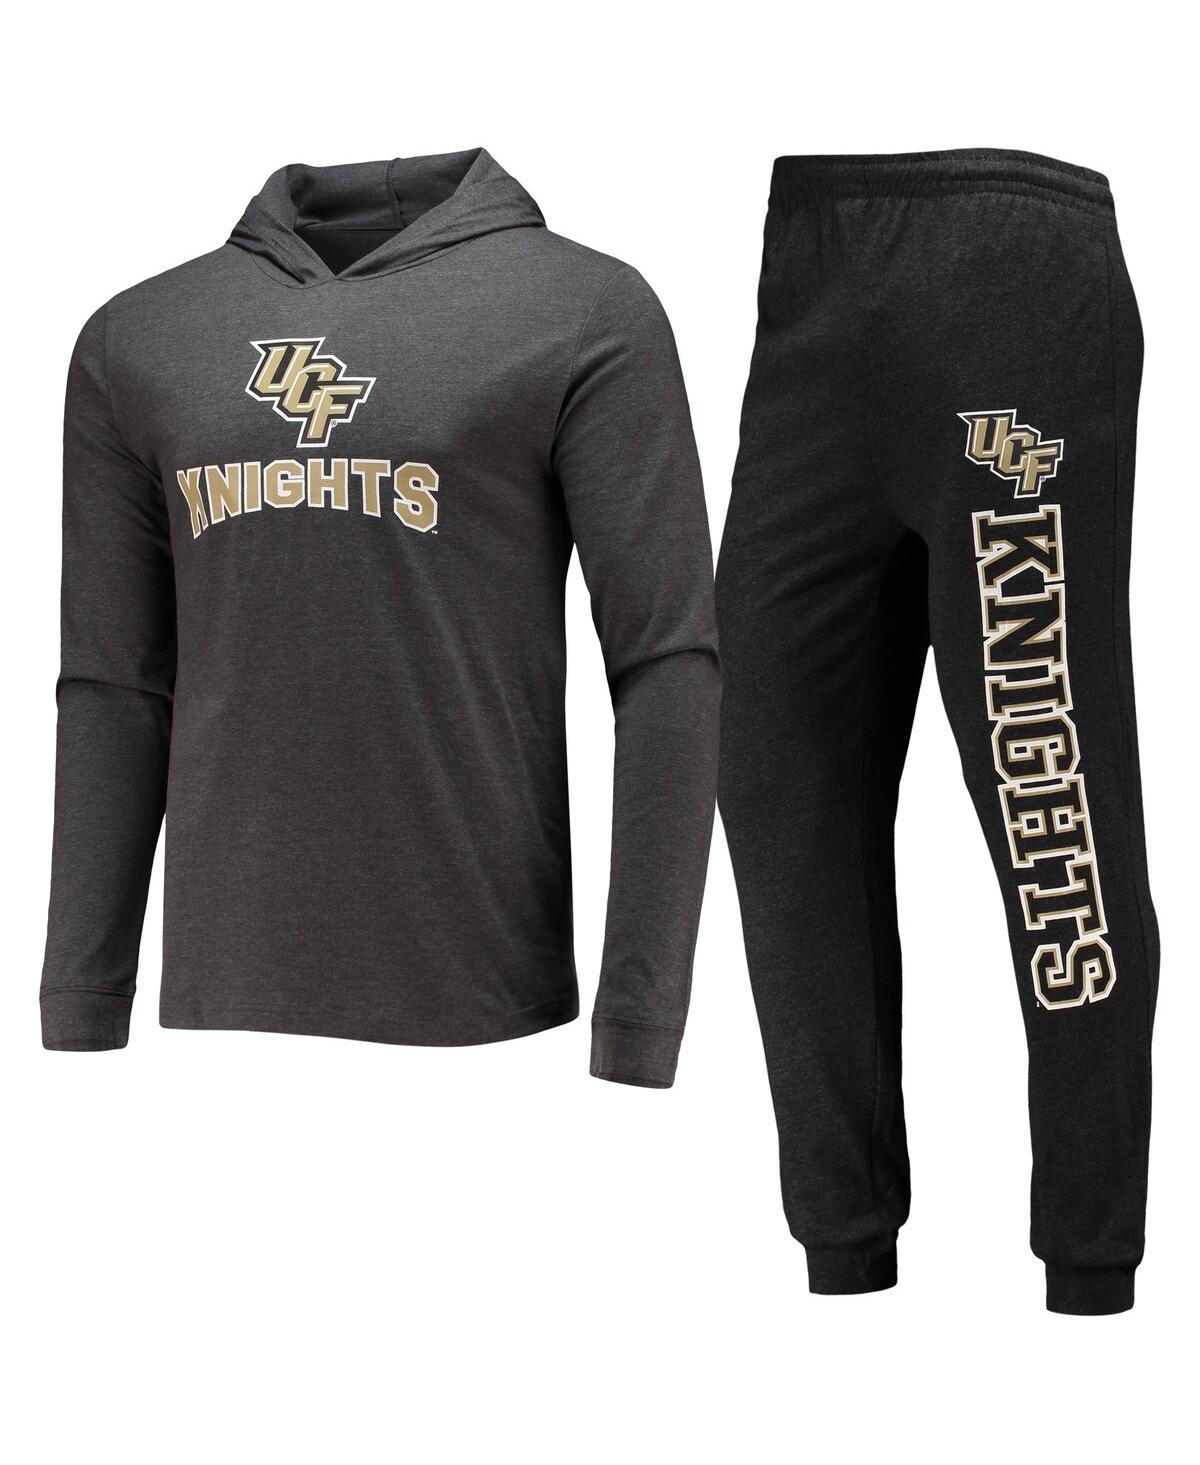 Men's Concepts Sport Black, Heather Charcoal Ucf Knights Meter Long Sleeve Hoodie T-shirt and Jogger Pajama Set - Black, Heather Charcoal